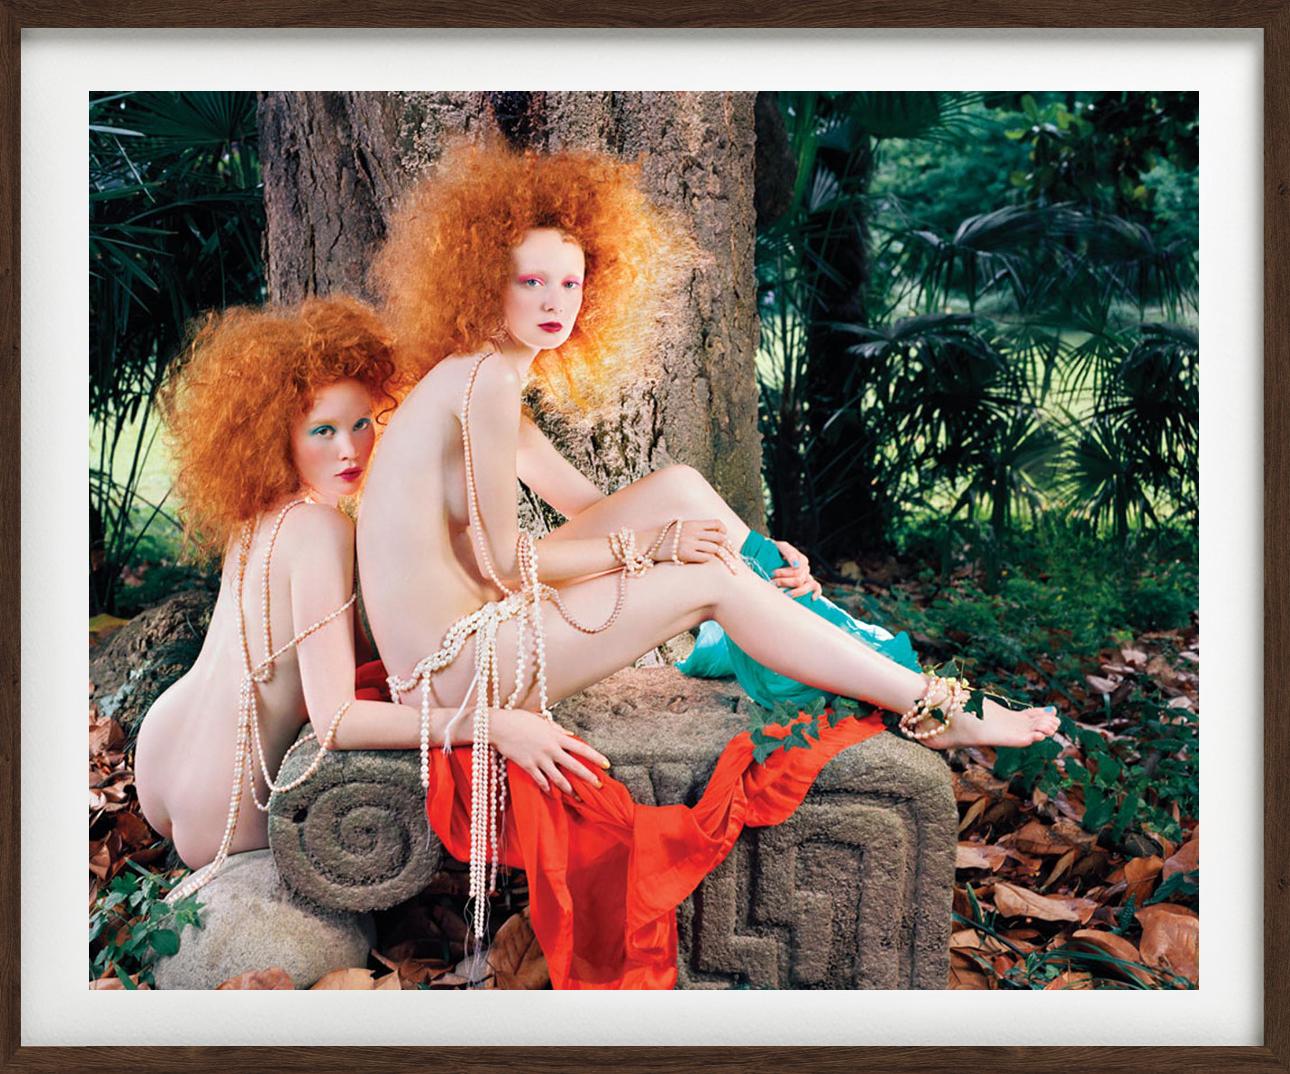 Red Hair #1 - nude double portrait with pearls, fine art photography, 2004 - Brown Nude Photograph by Iris Brosch